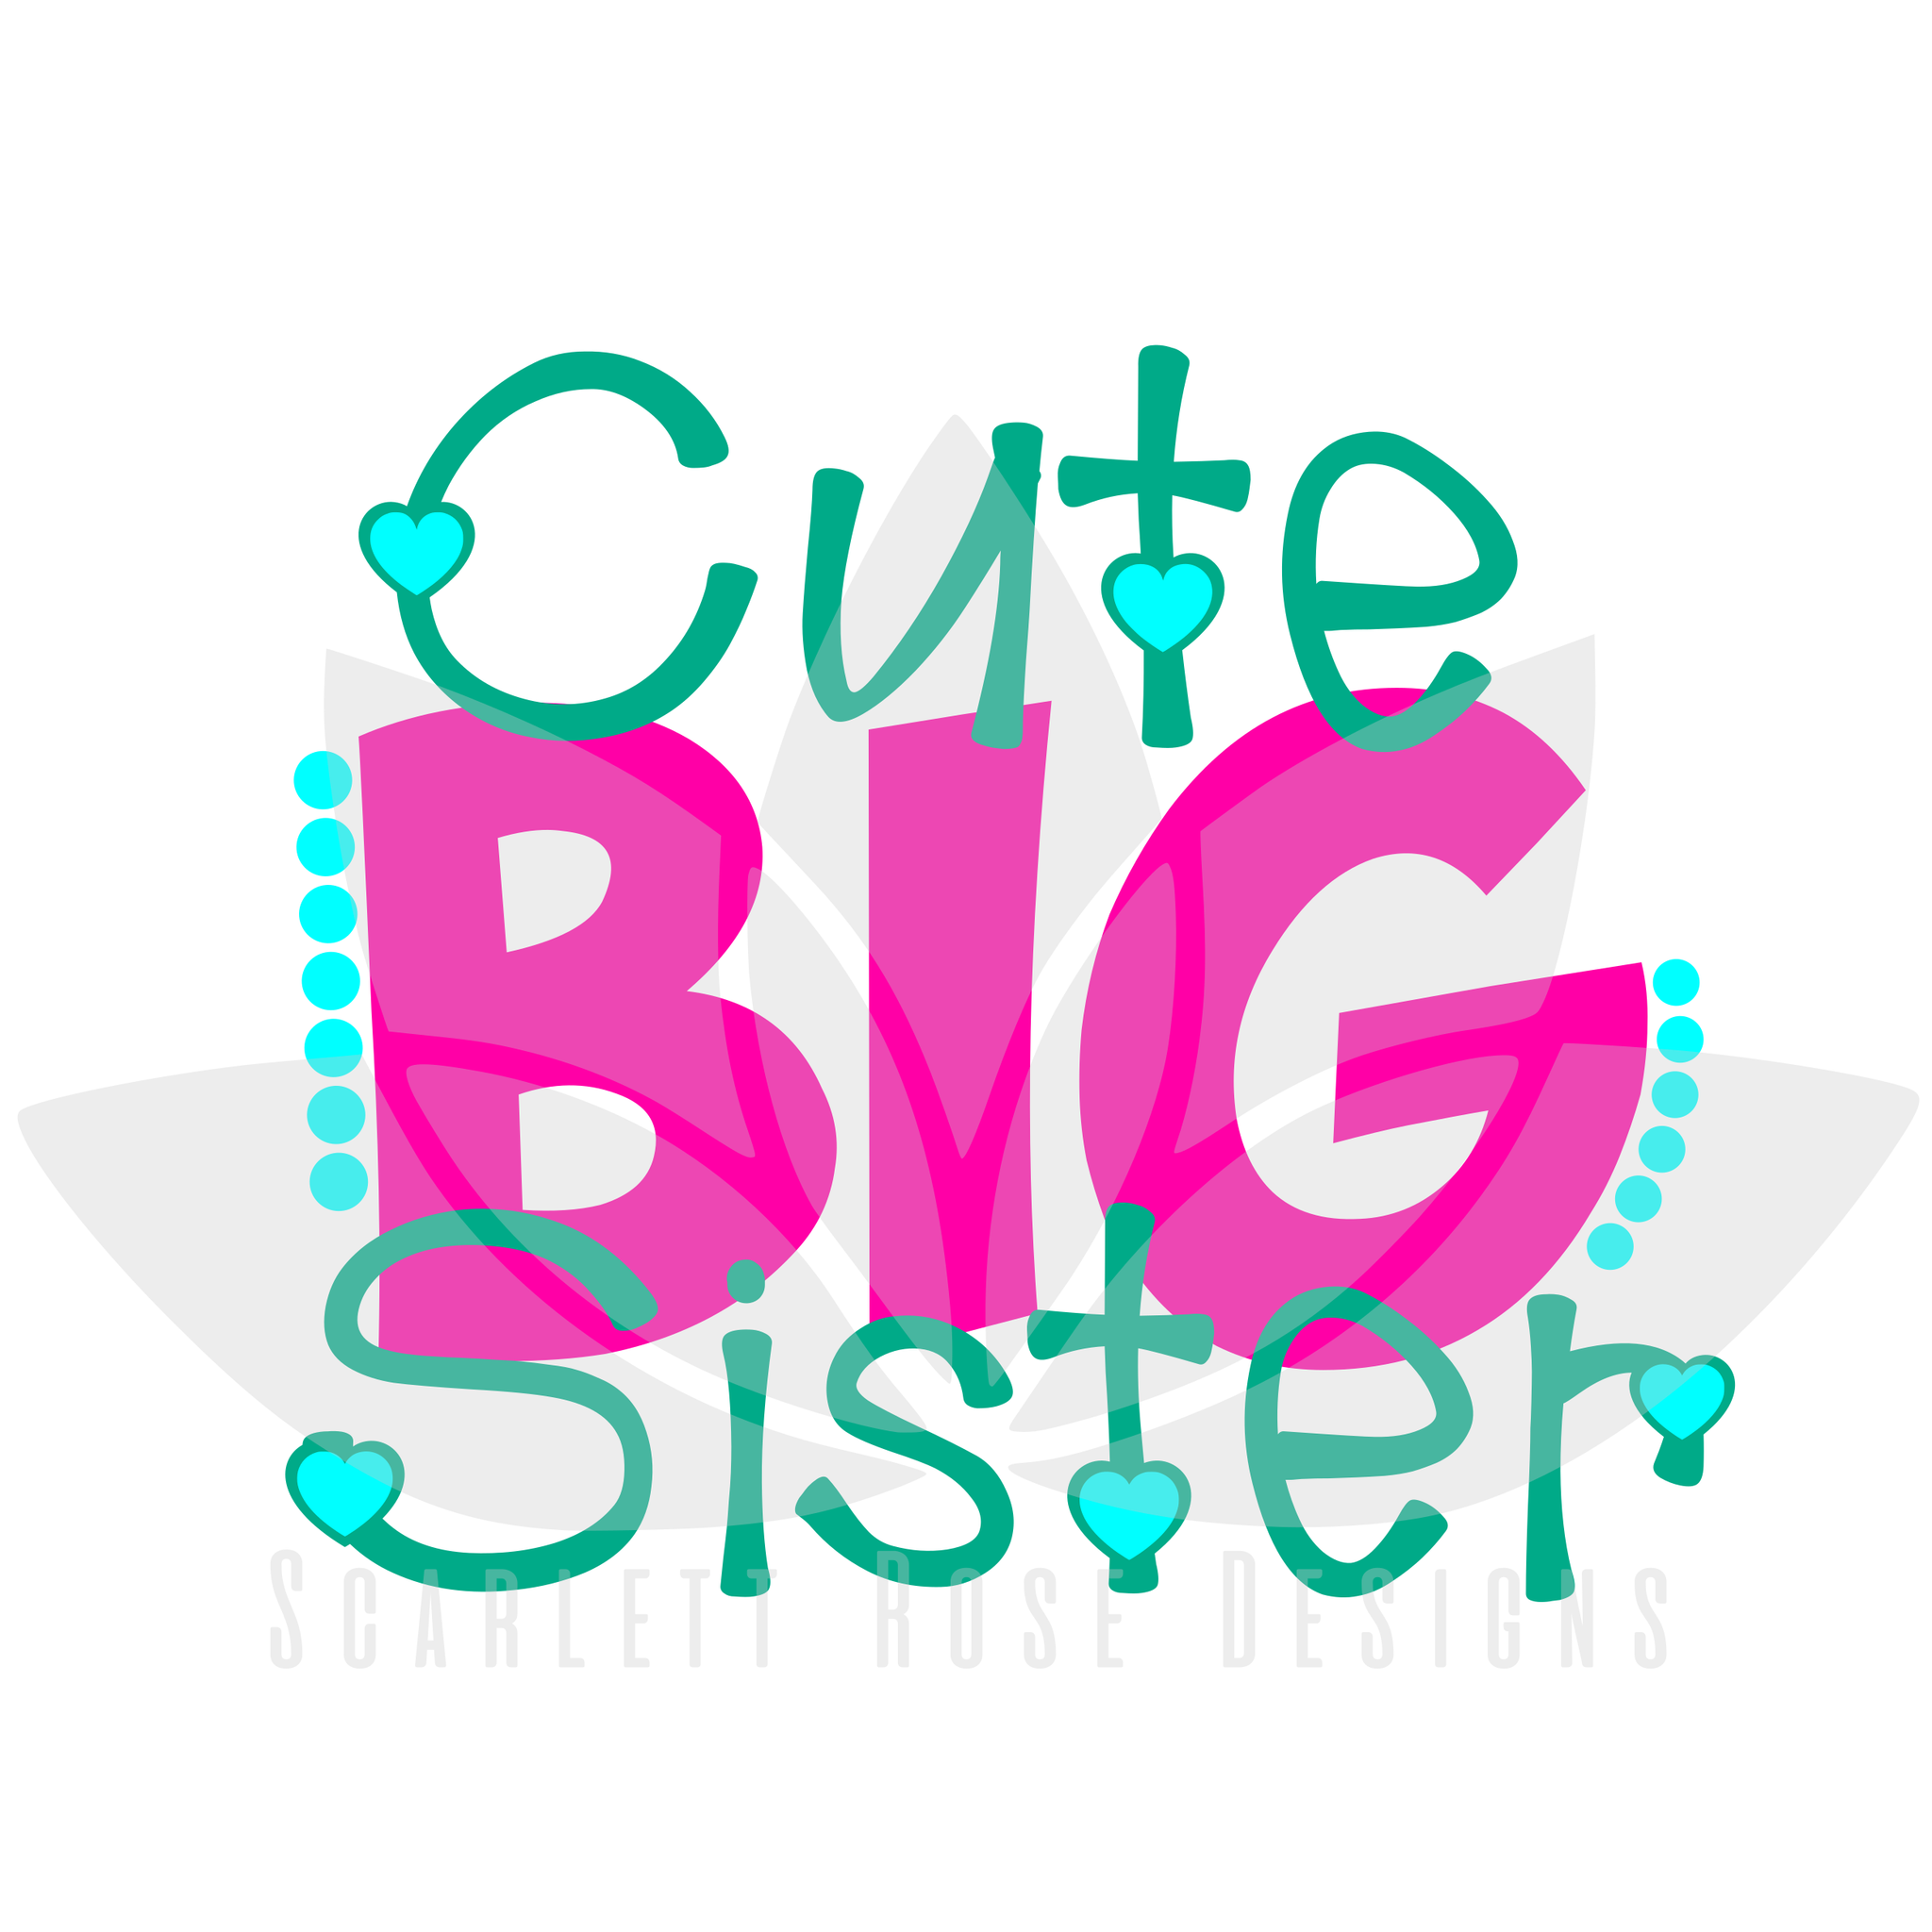 Download New Cute Big Sister Svg Cut File New Baby Announcement Scarlett Rose Designs